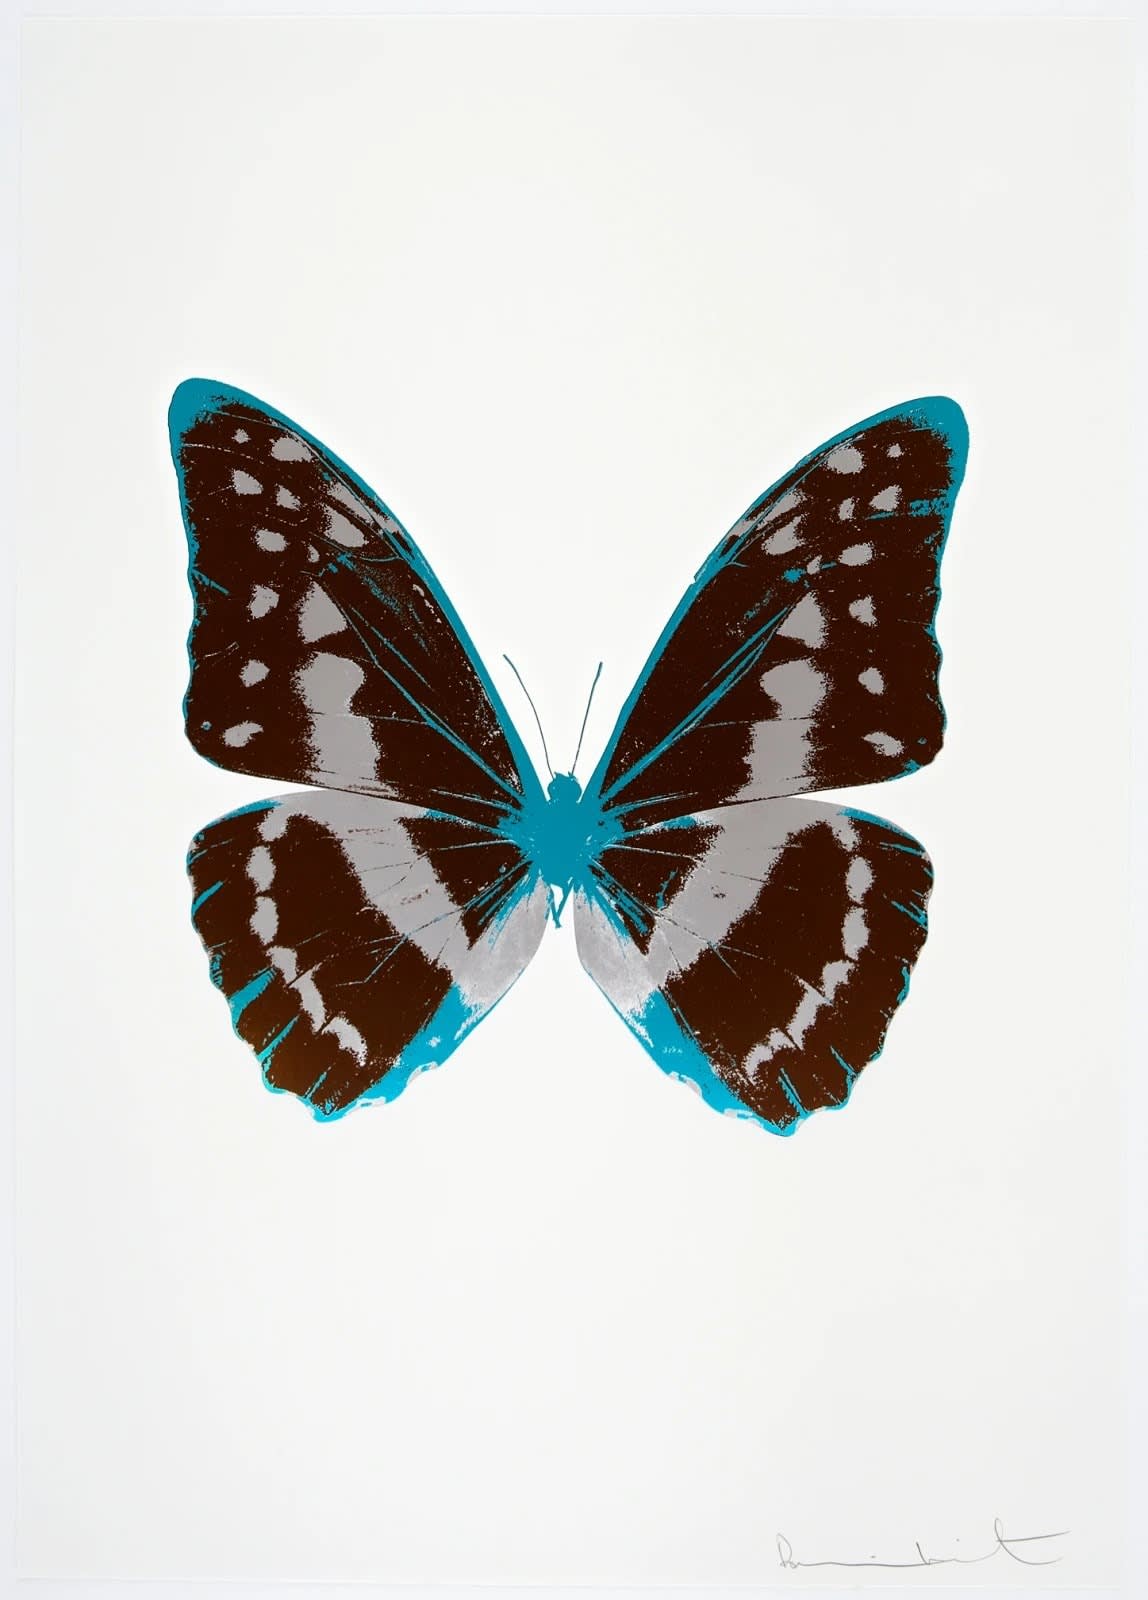 Damien Hirst, The Souls III – Chocolate/Silver Gloss/Topaz, 2010